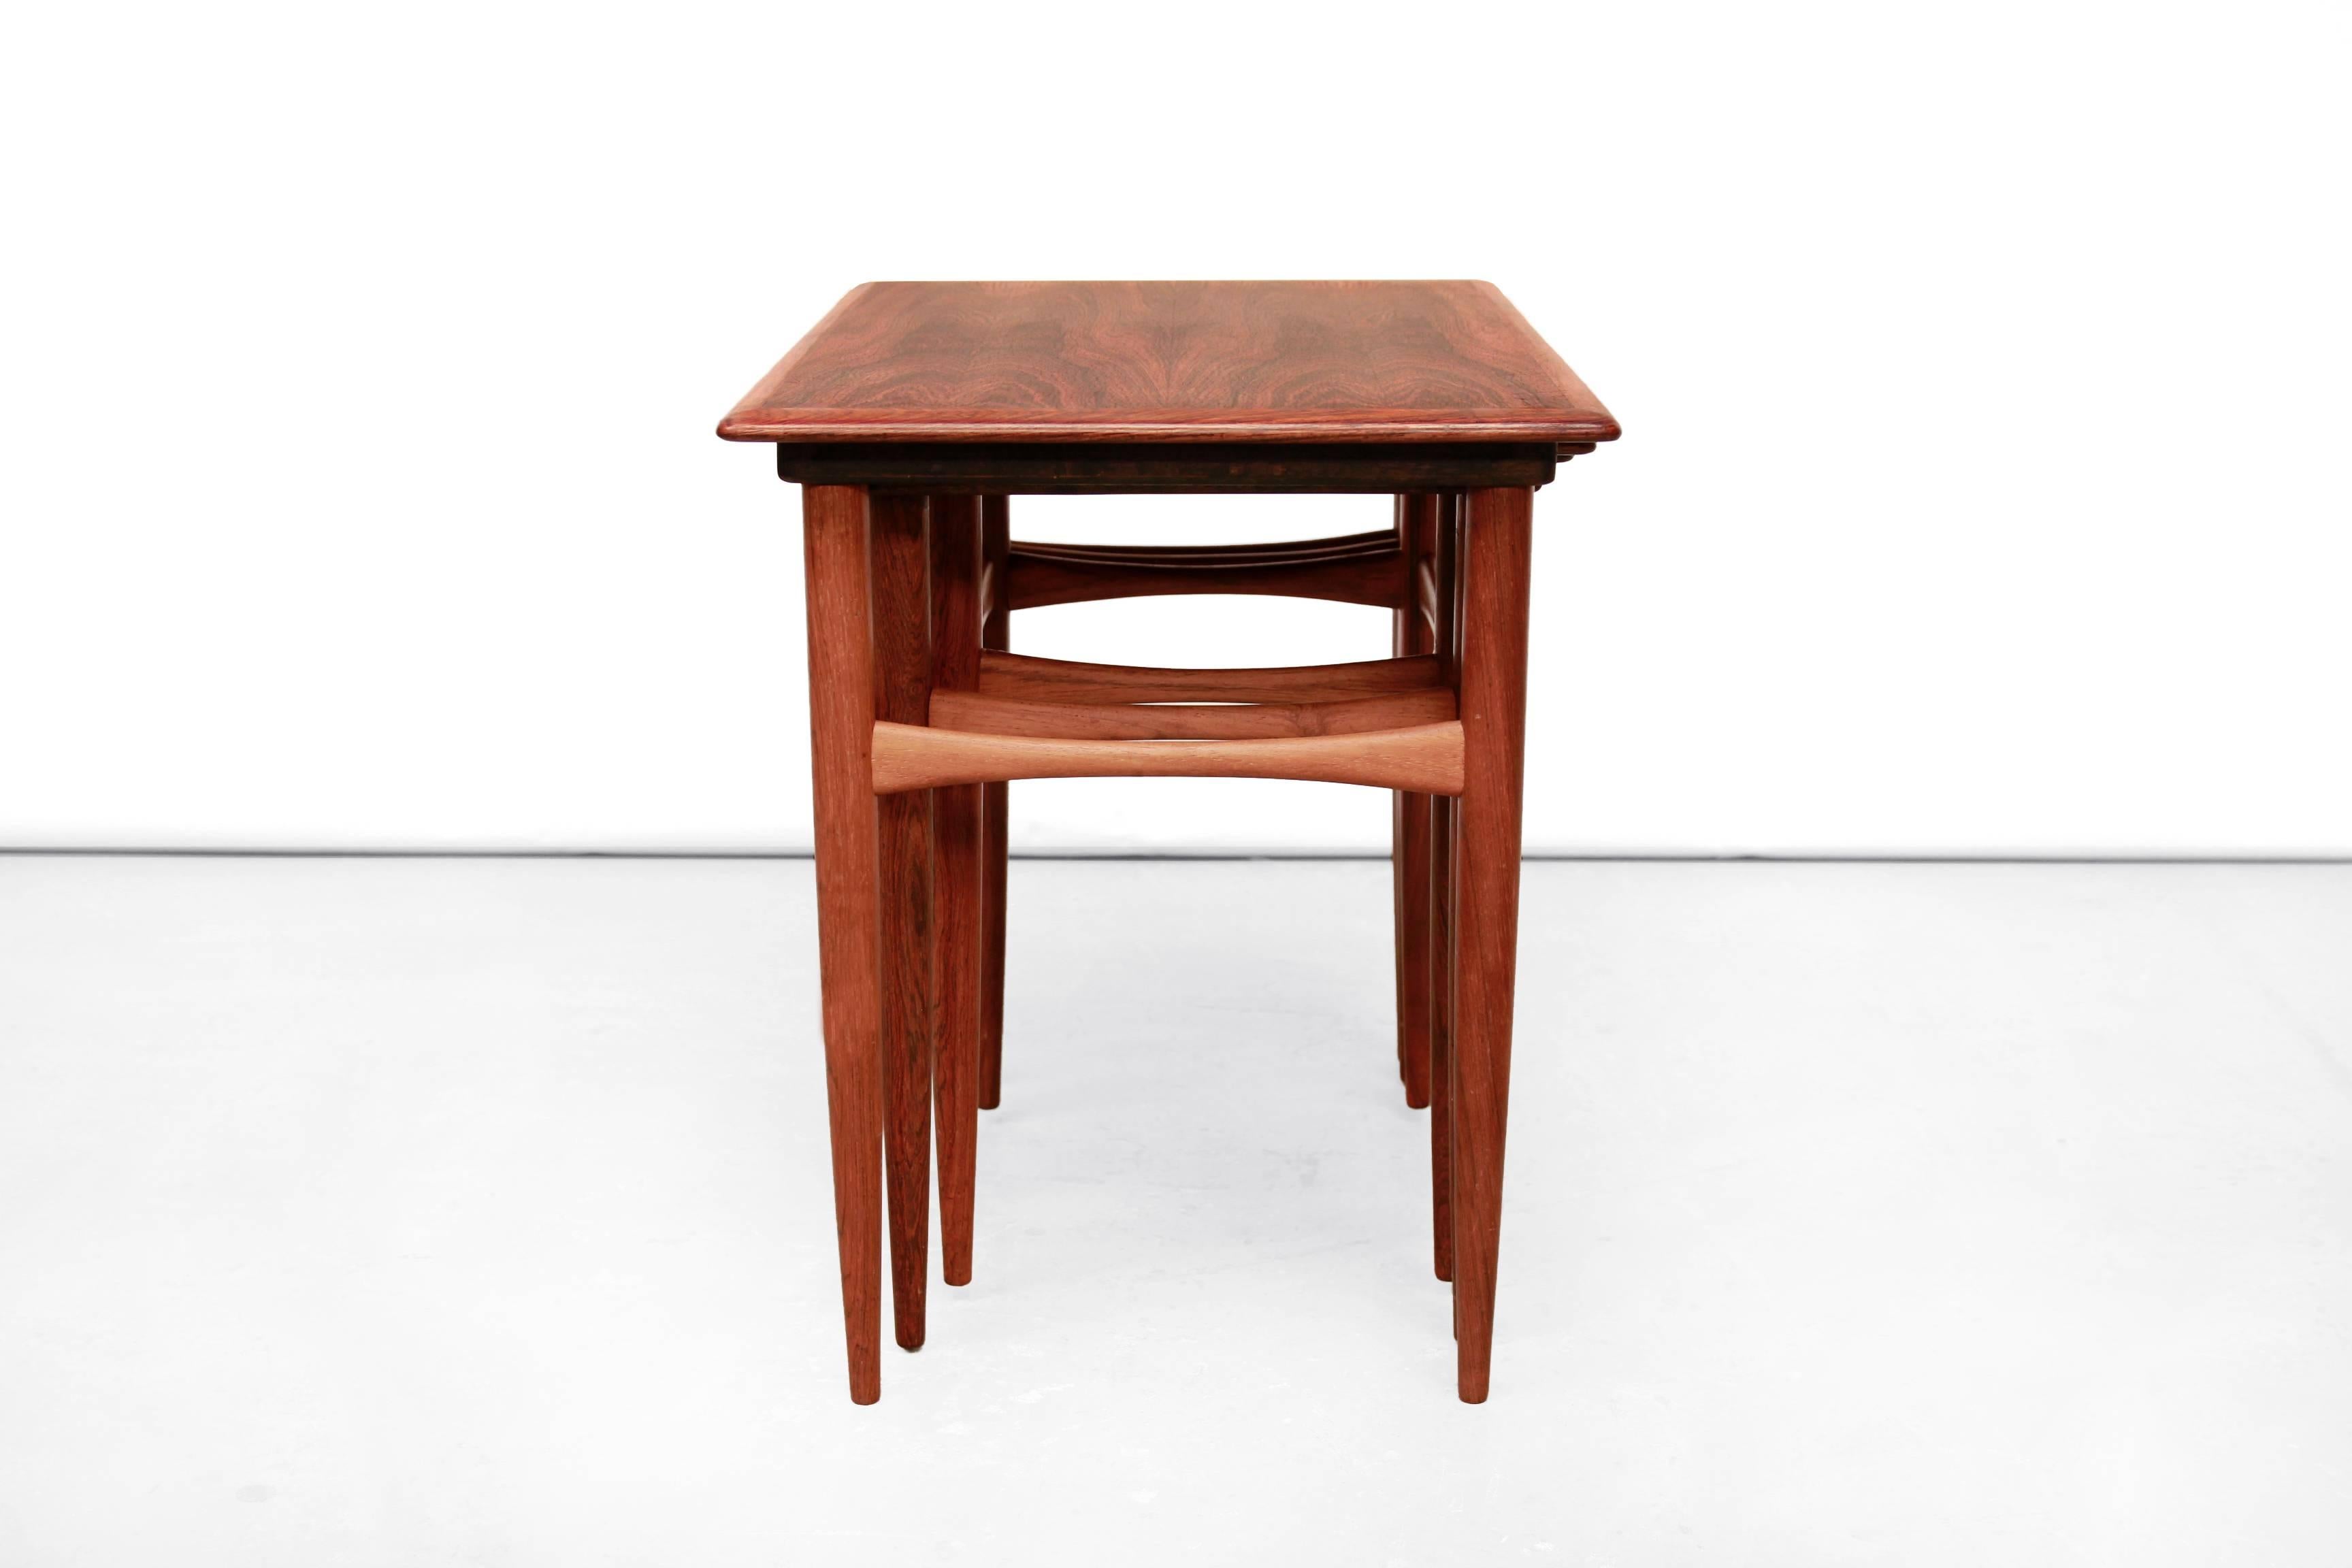 Very beautiful set of three rosewood nesting tables designed by Poul Hundevad for Fabian, Denmark in the 1960s. These nesting tables are made of partly solid rosewood and partly veneer. This set of tables will fit in every interior style. The tables